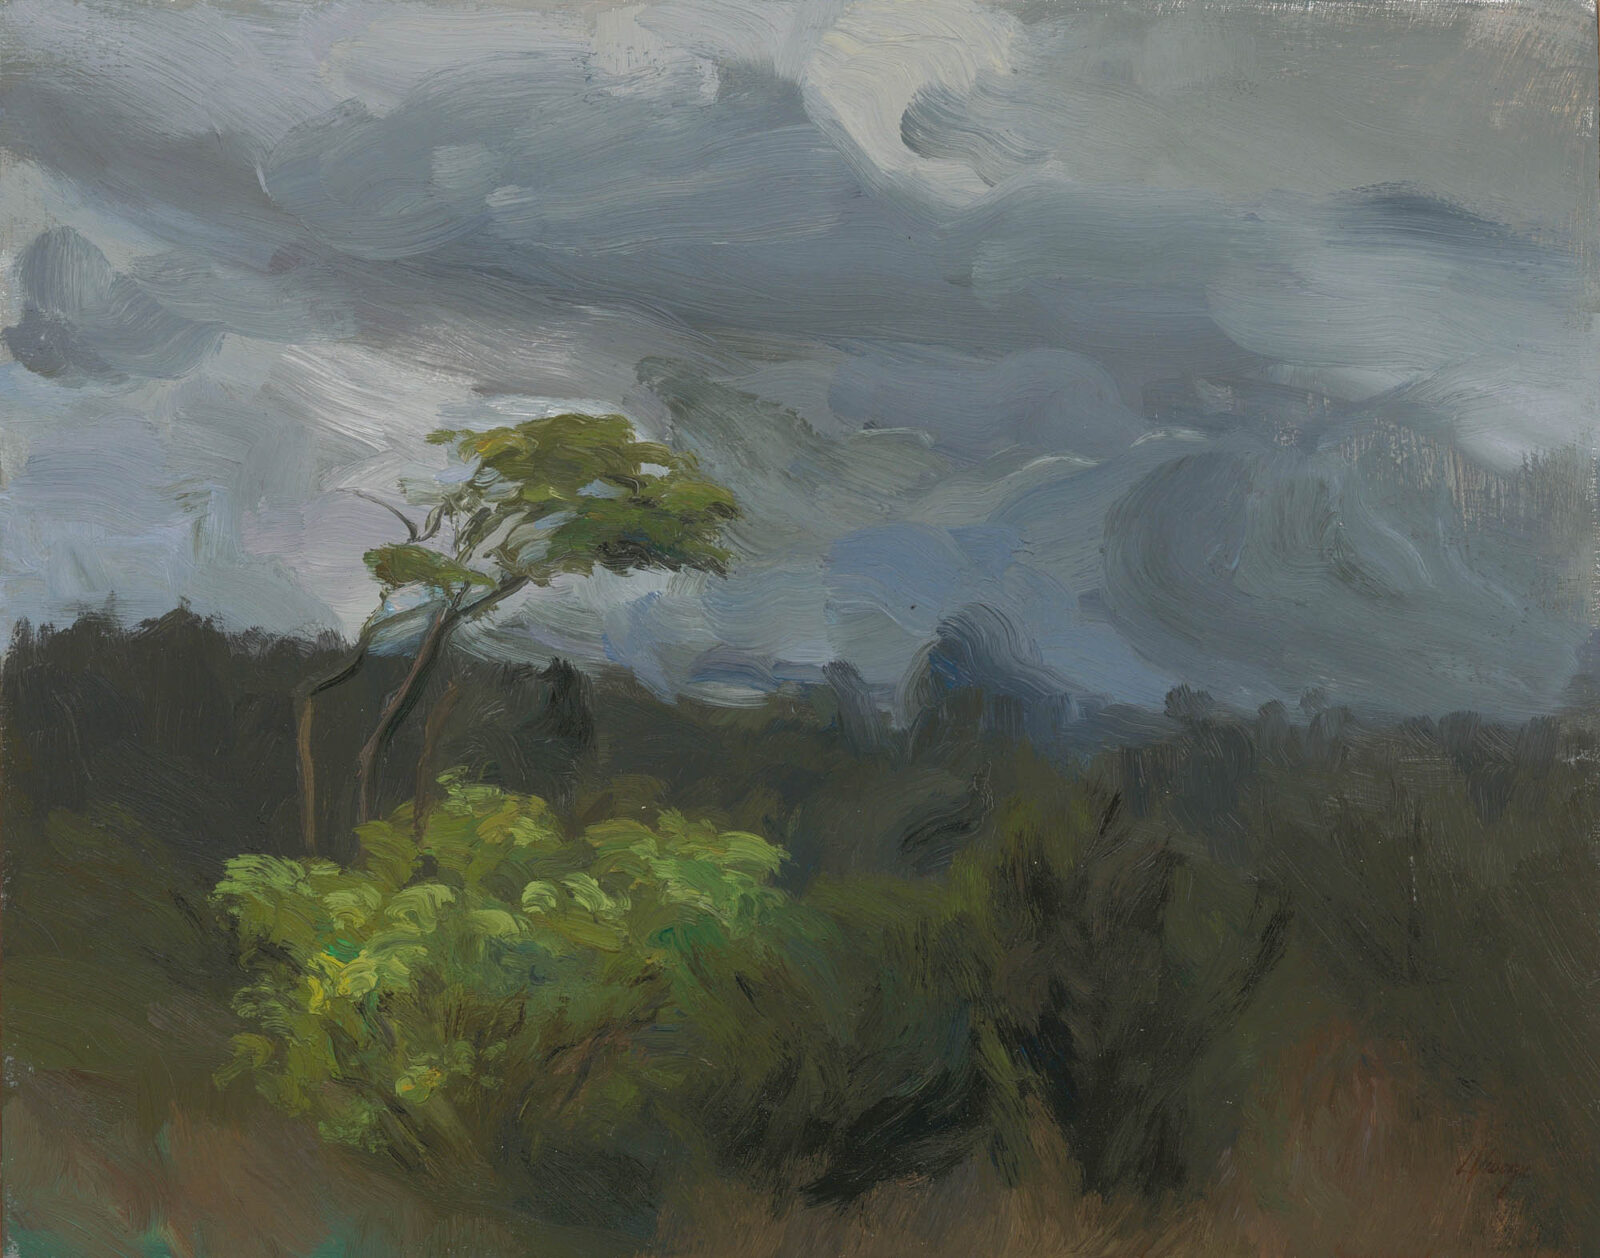 Liza Visagie - Approaching Storm. Oil on Board 9 x 11 inches